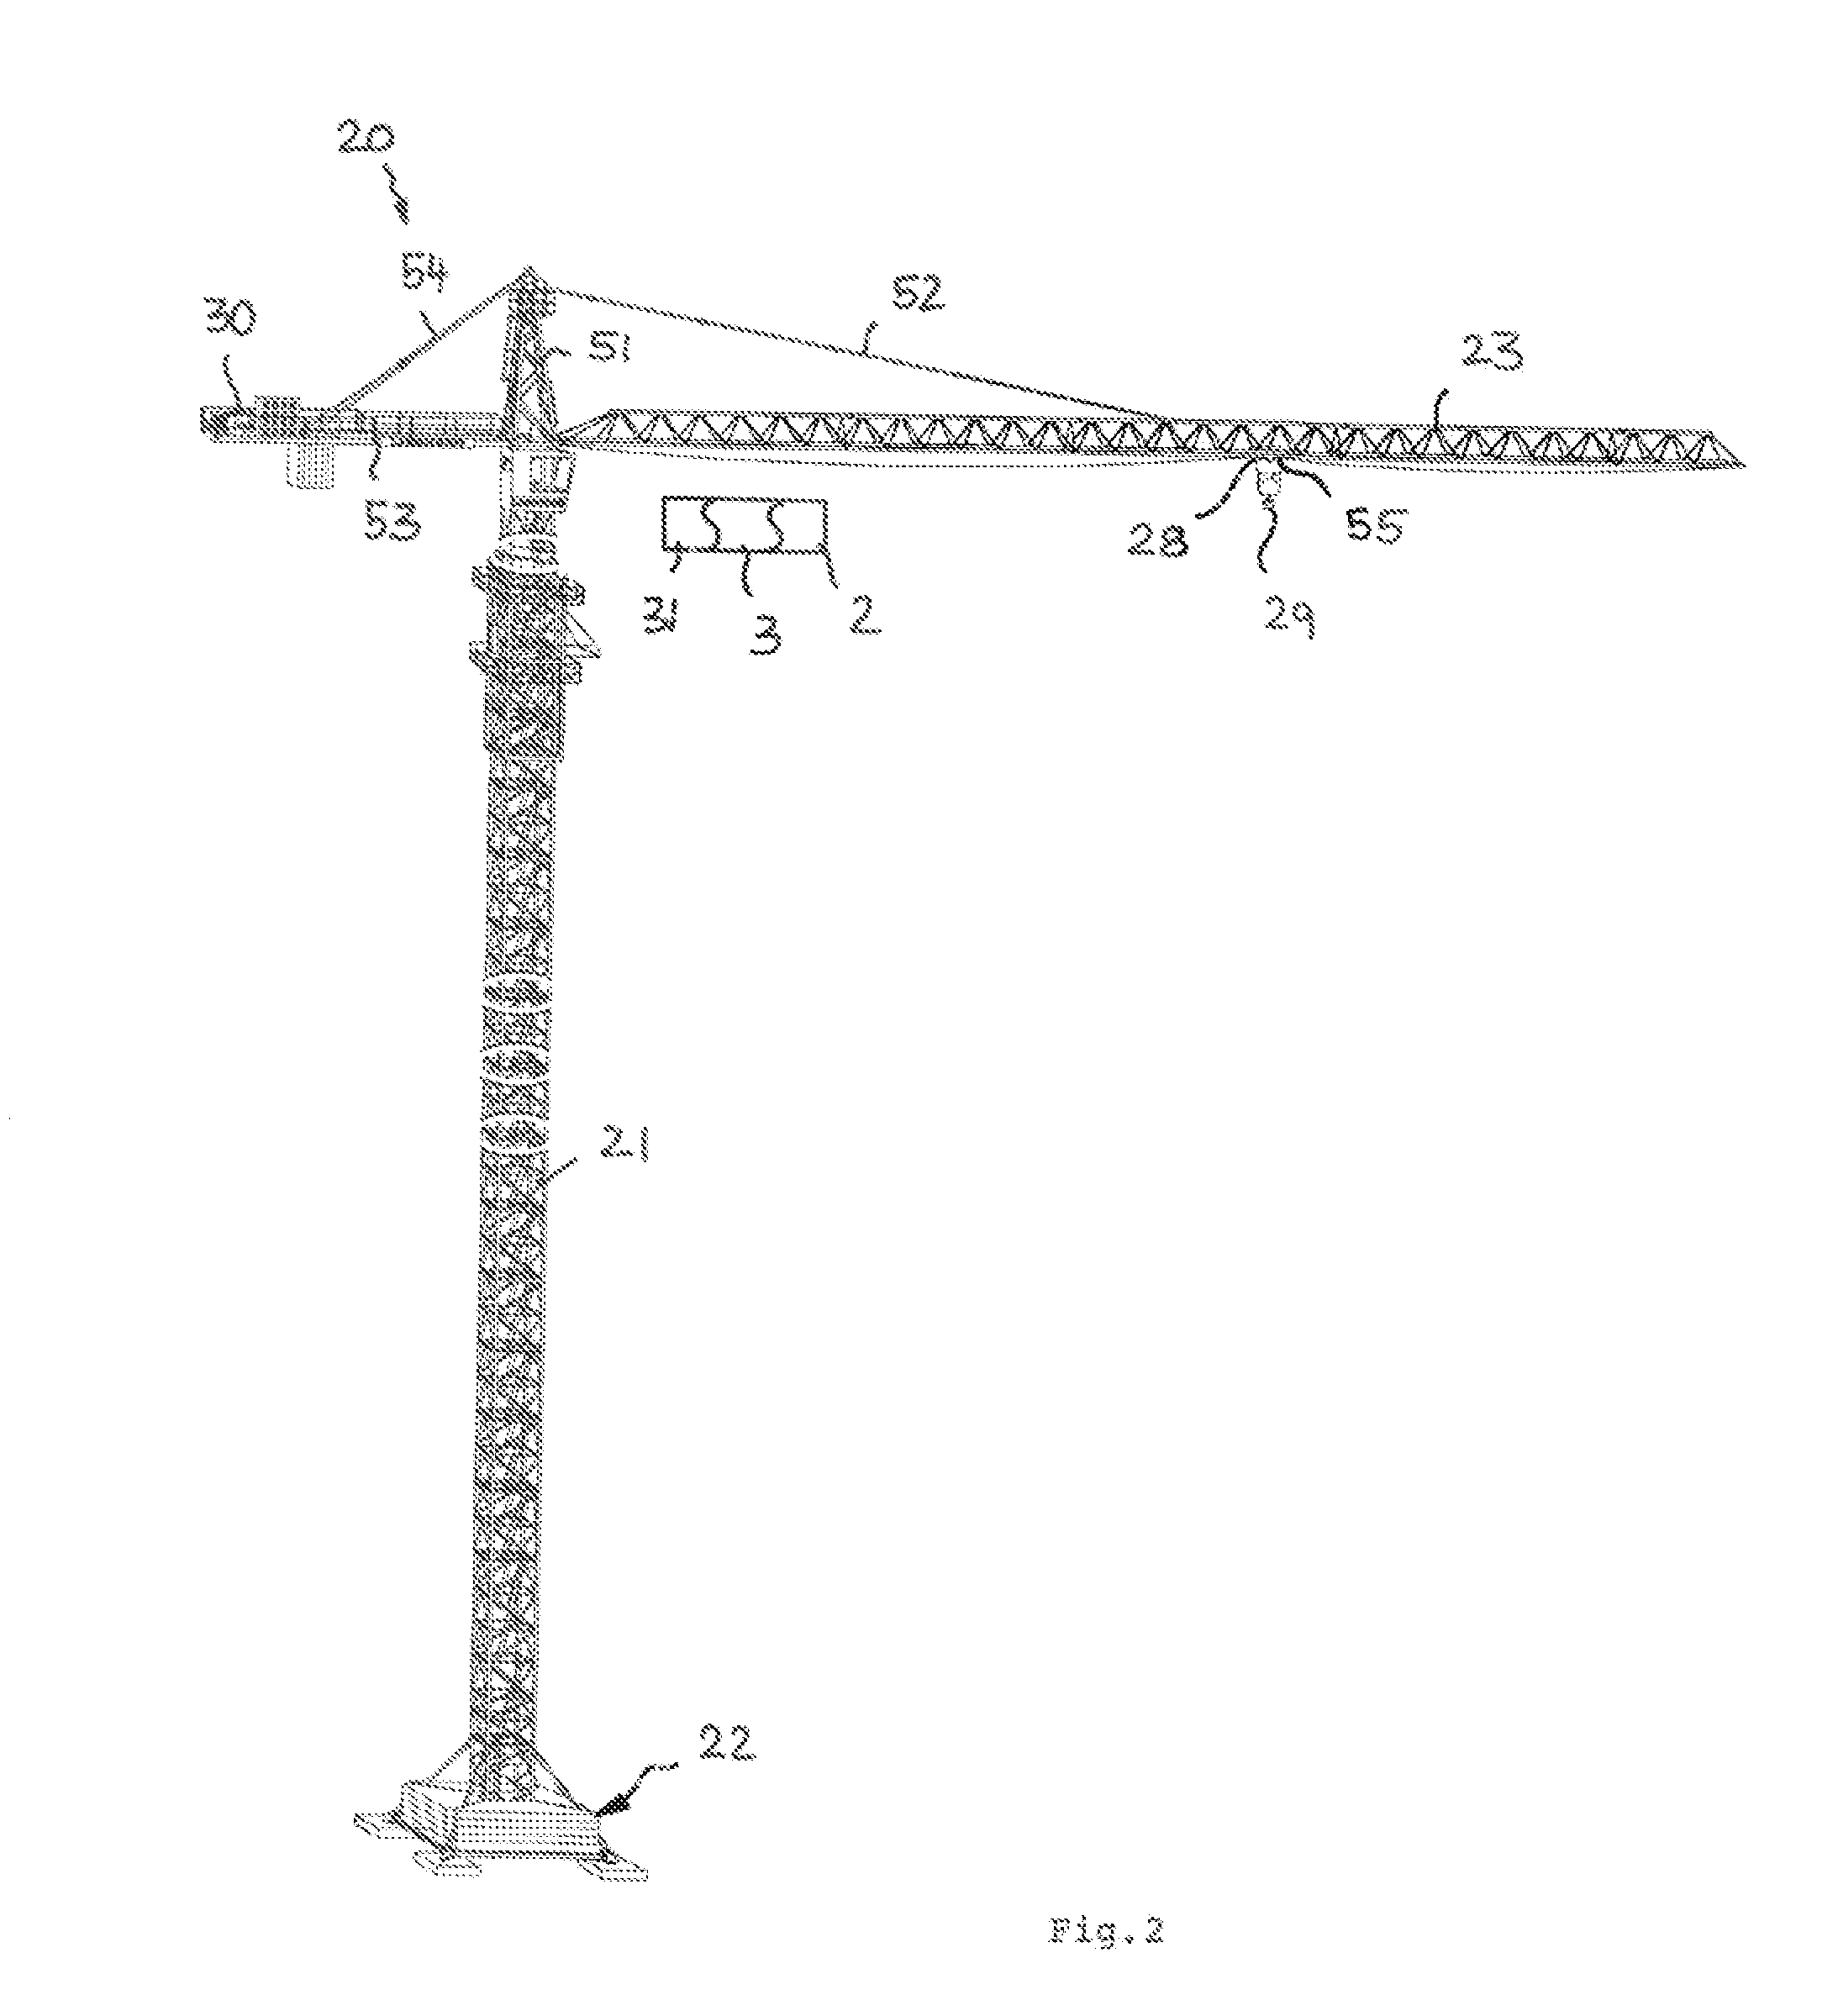 Apparatus for recognizing the discard state of a high-strength fiber rope in use in lifting gear